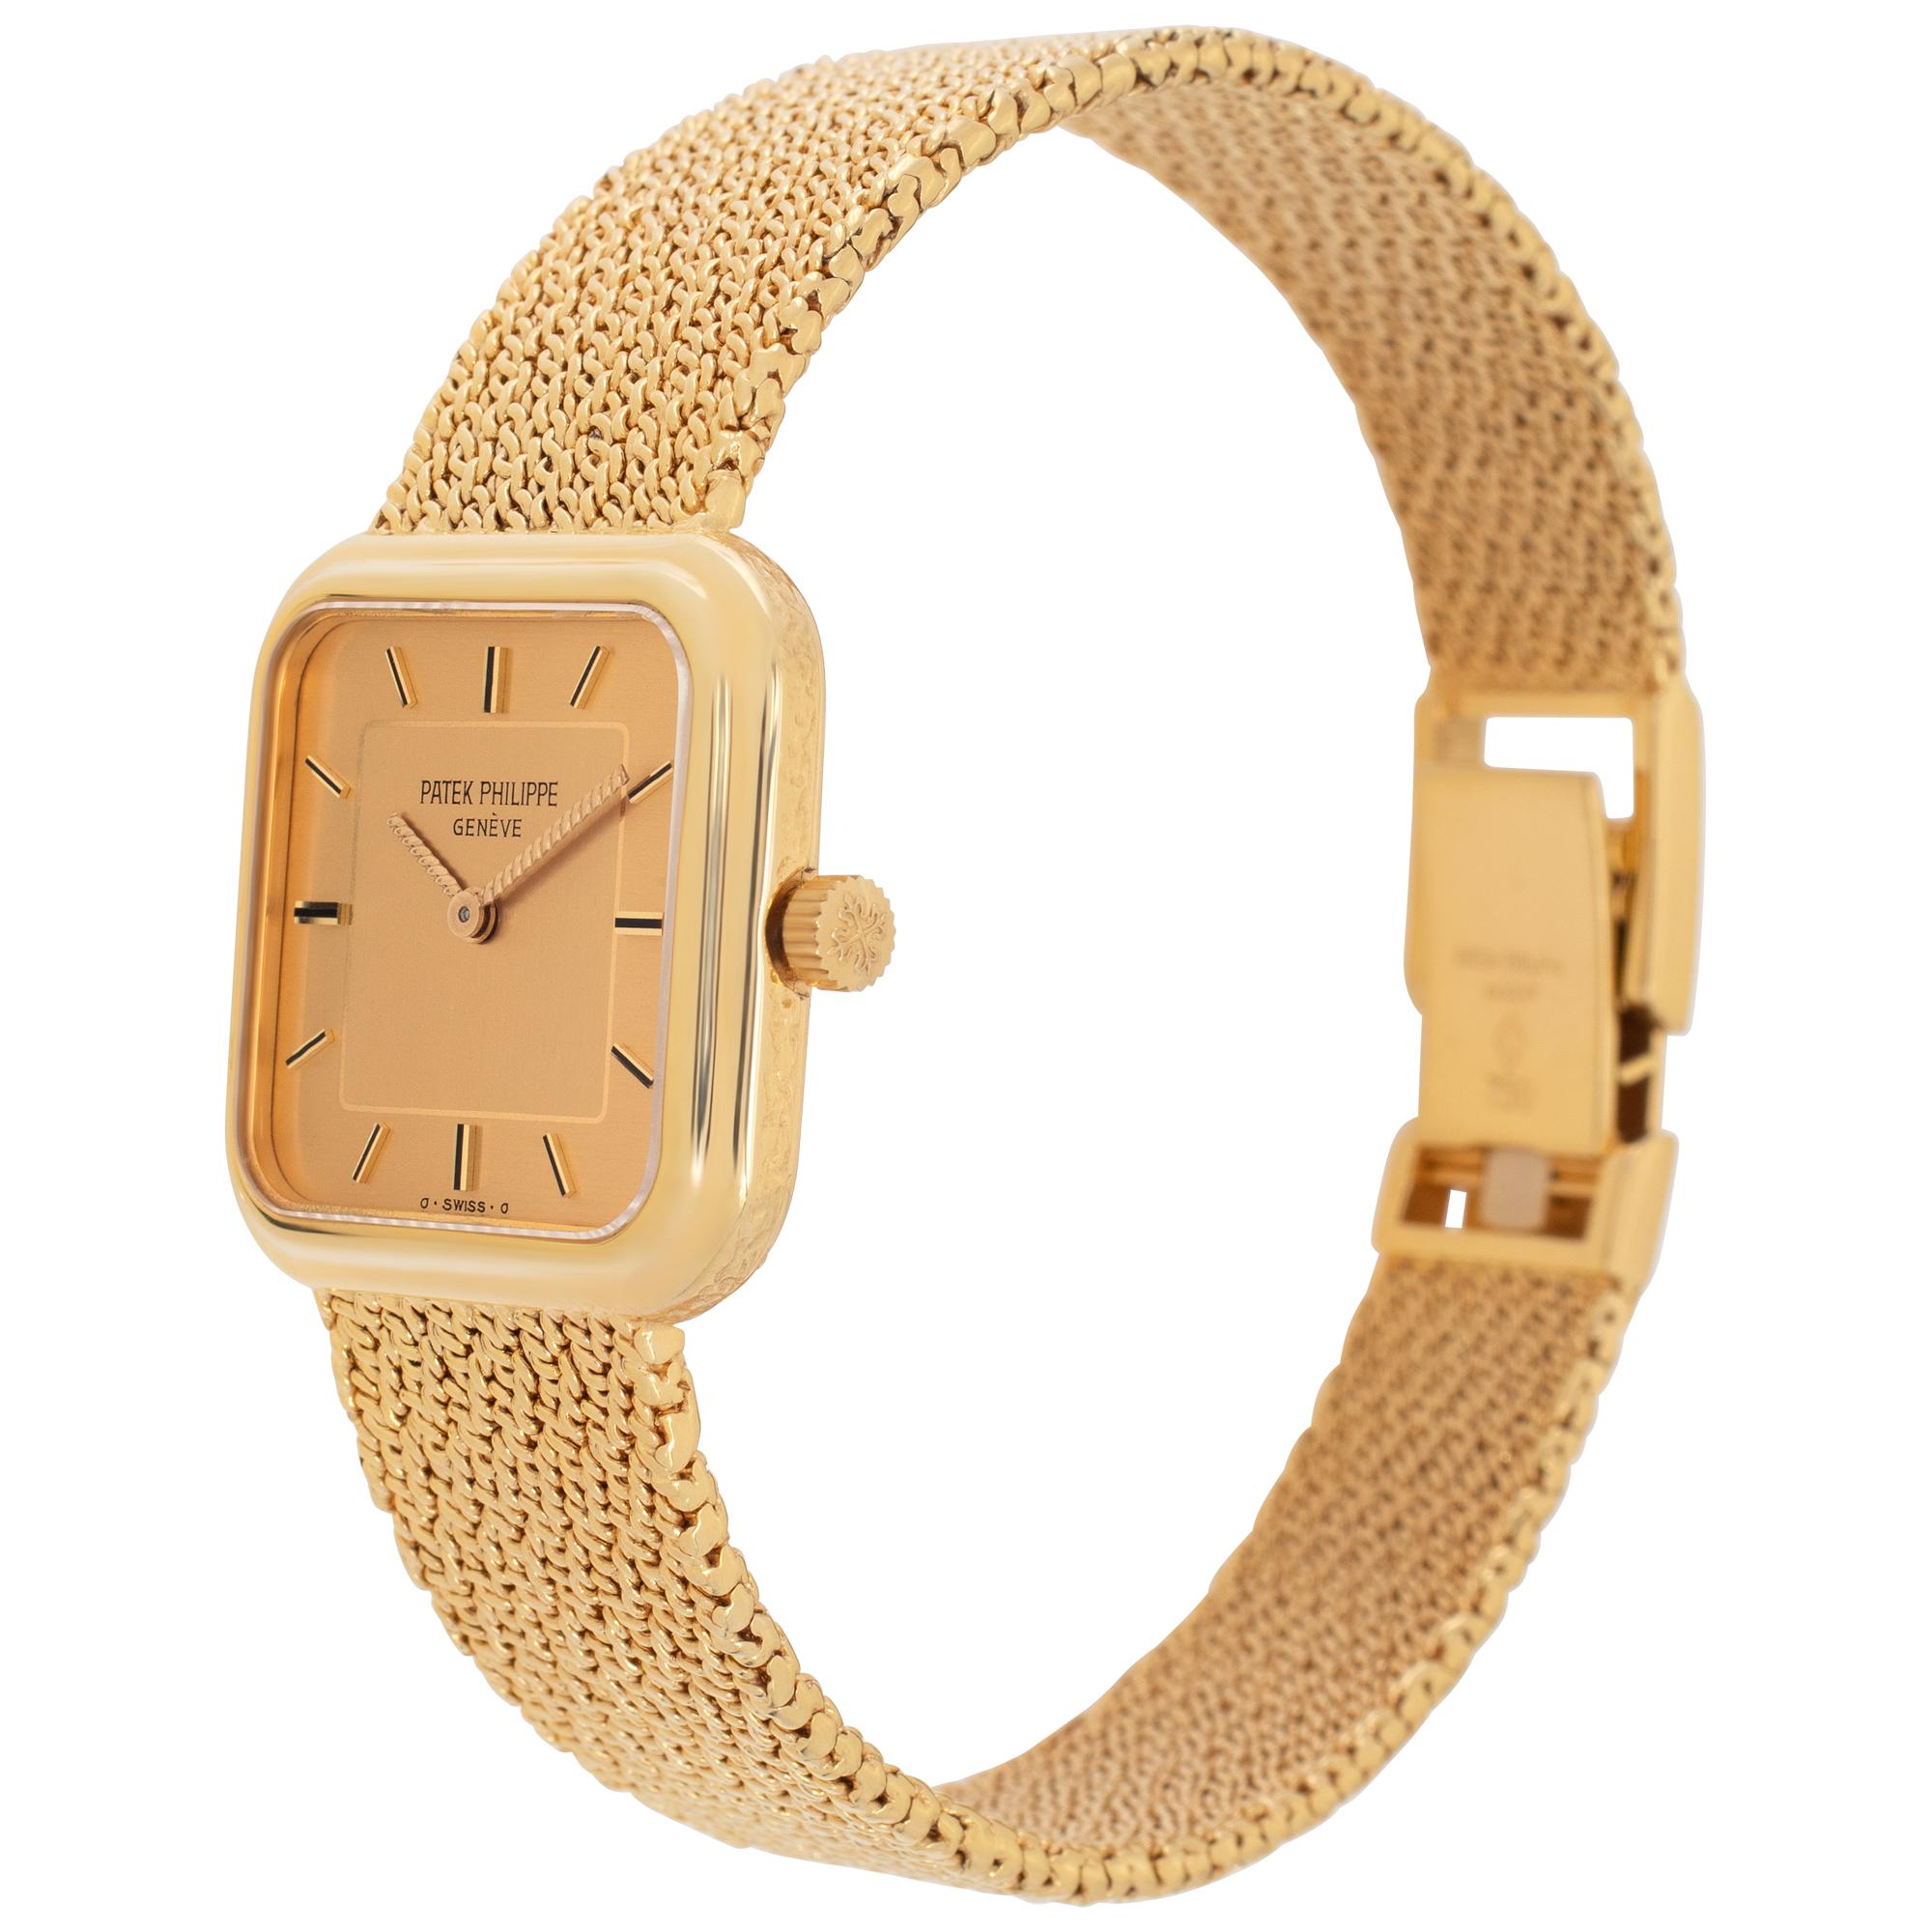 Vintage Patek Philippe in 18k yellow gold on an 18k mesh bracelet. Quartz. 24 mm case size. Will fit up to a 6.75 inch wrist size. Ref 4456-2. Fine Pre-owned Patek Philippe Watch. Certified preowned Vintage Patek Philippe 4456-2 watch is made out of